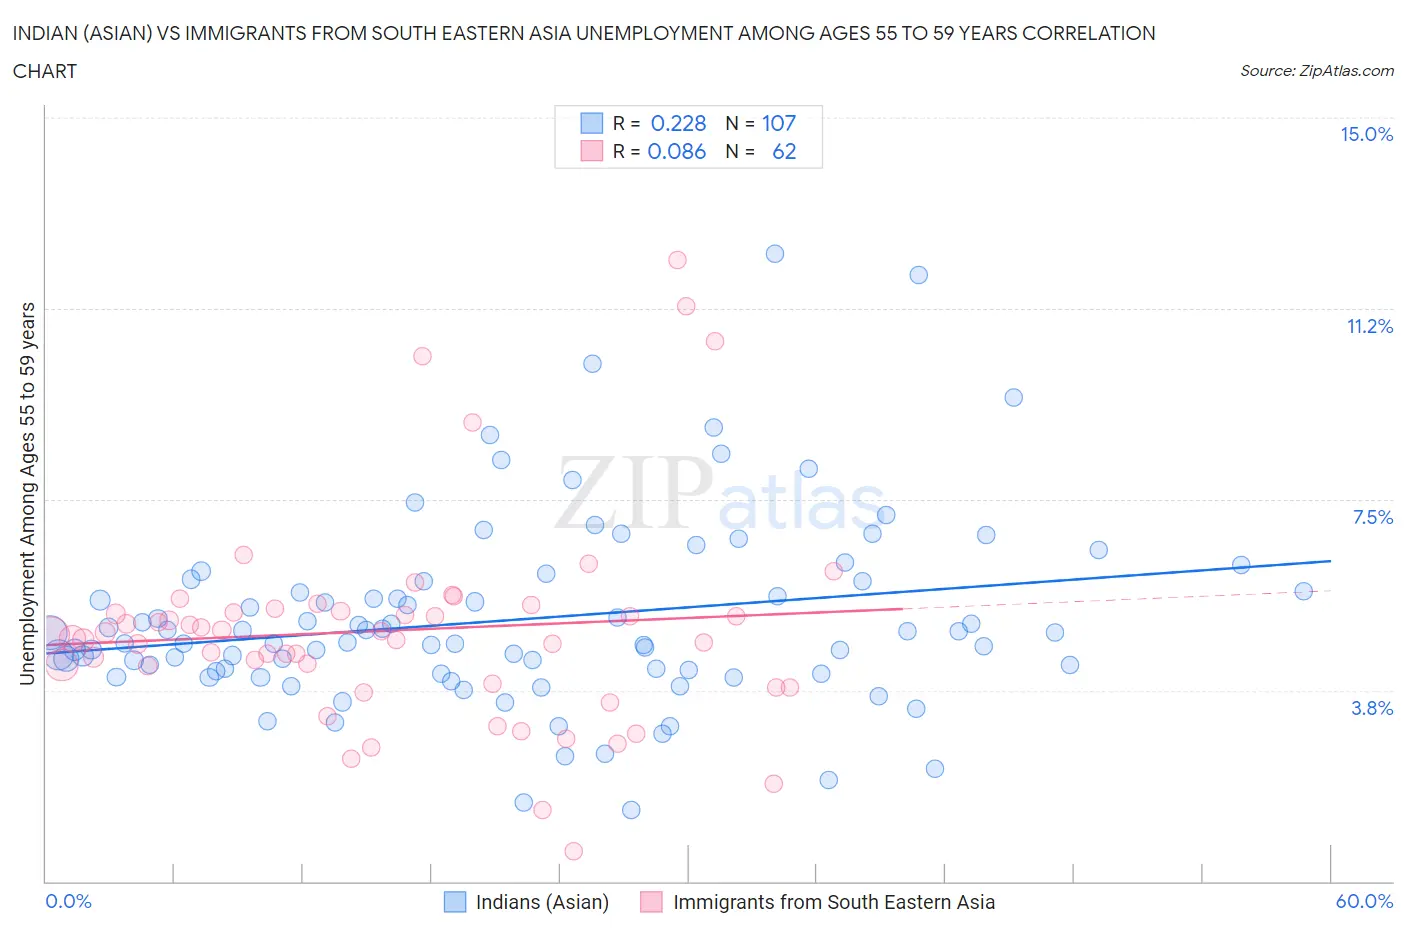 Indian (Asian) vs Immigrants from South Eastern Asia Unemployment Among Ages 55 to 59 years